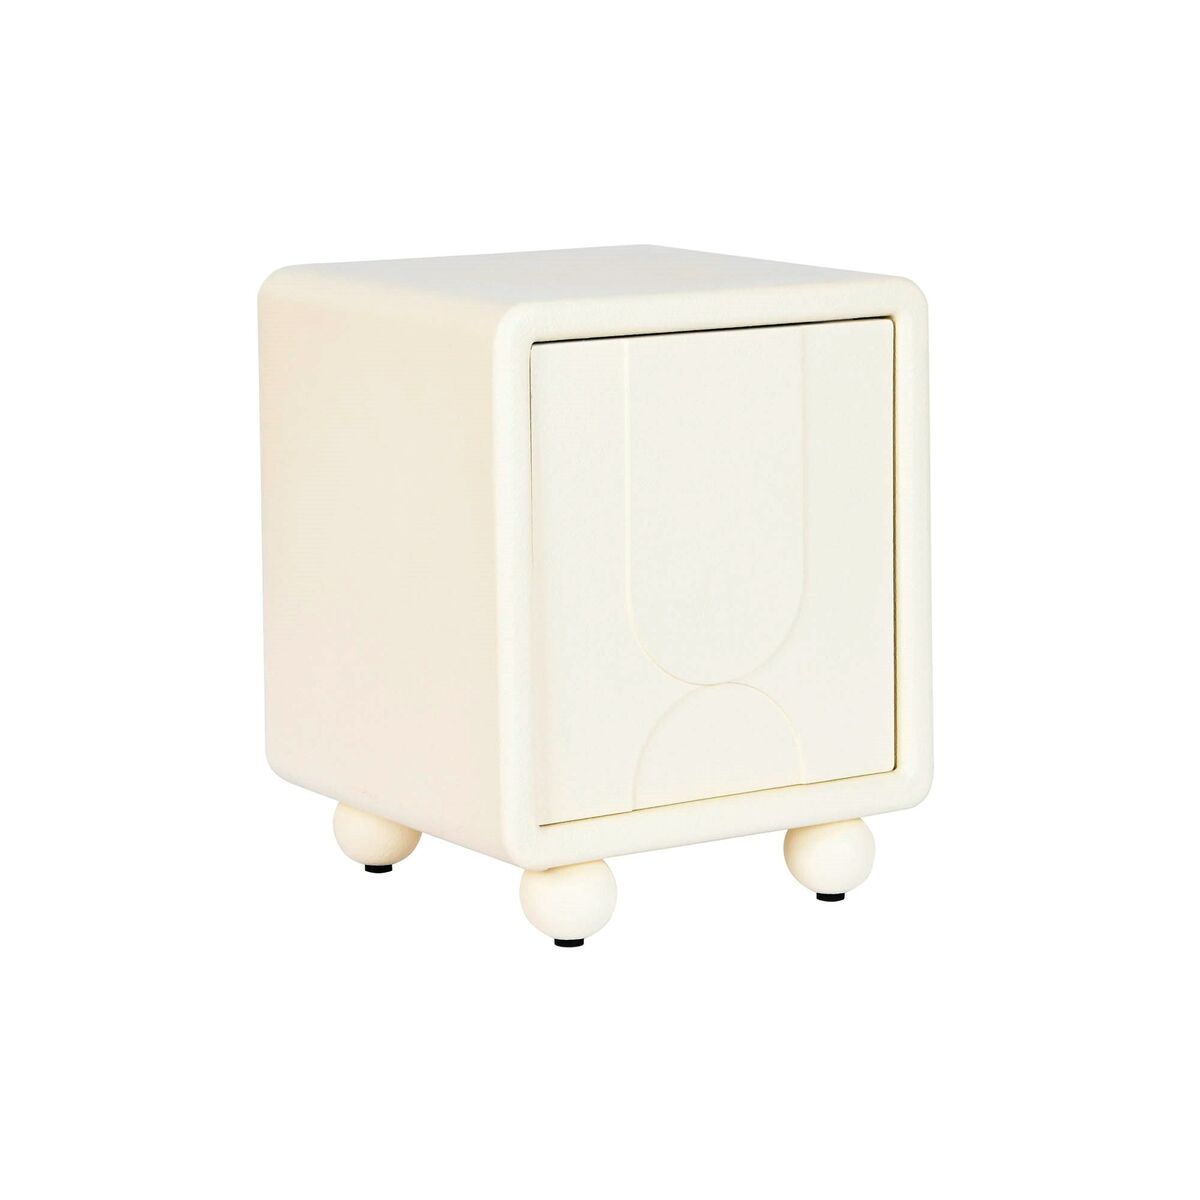 White Bedside Table with Rounded Legs (45 x 40 x 55 cm)